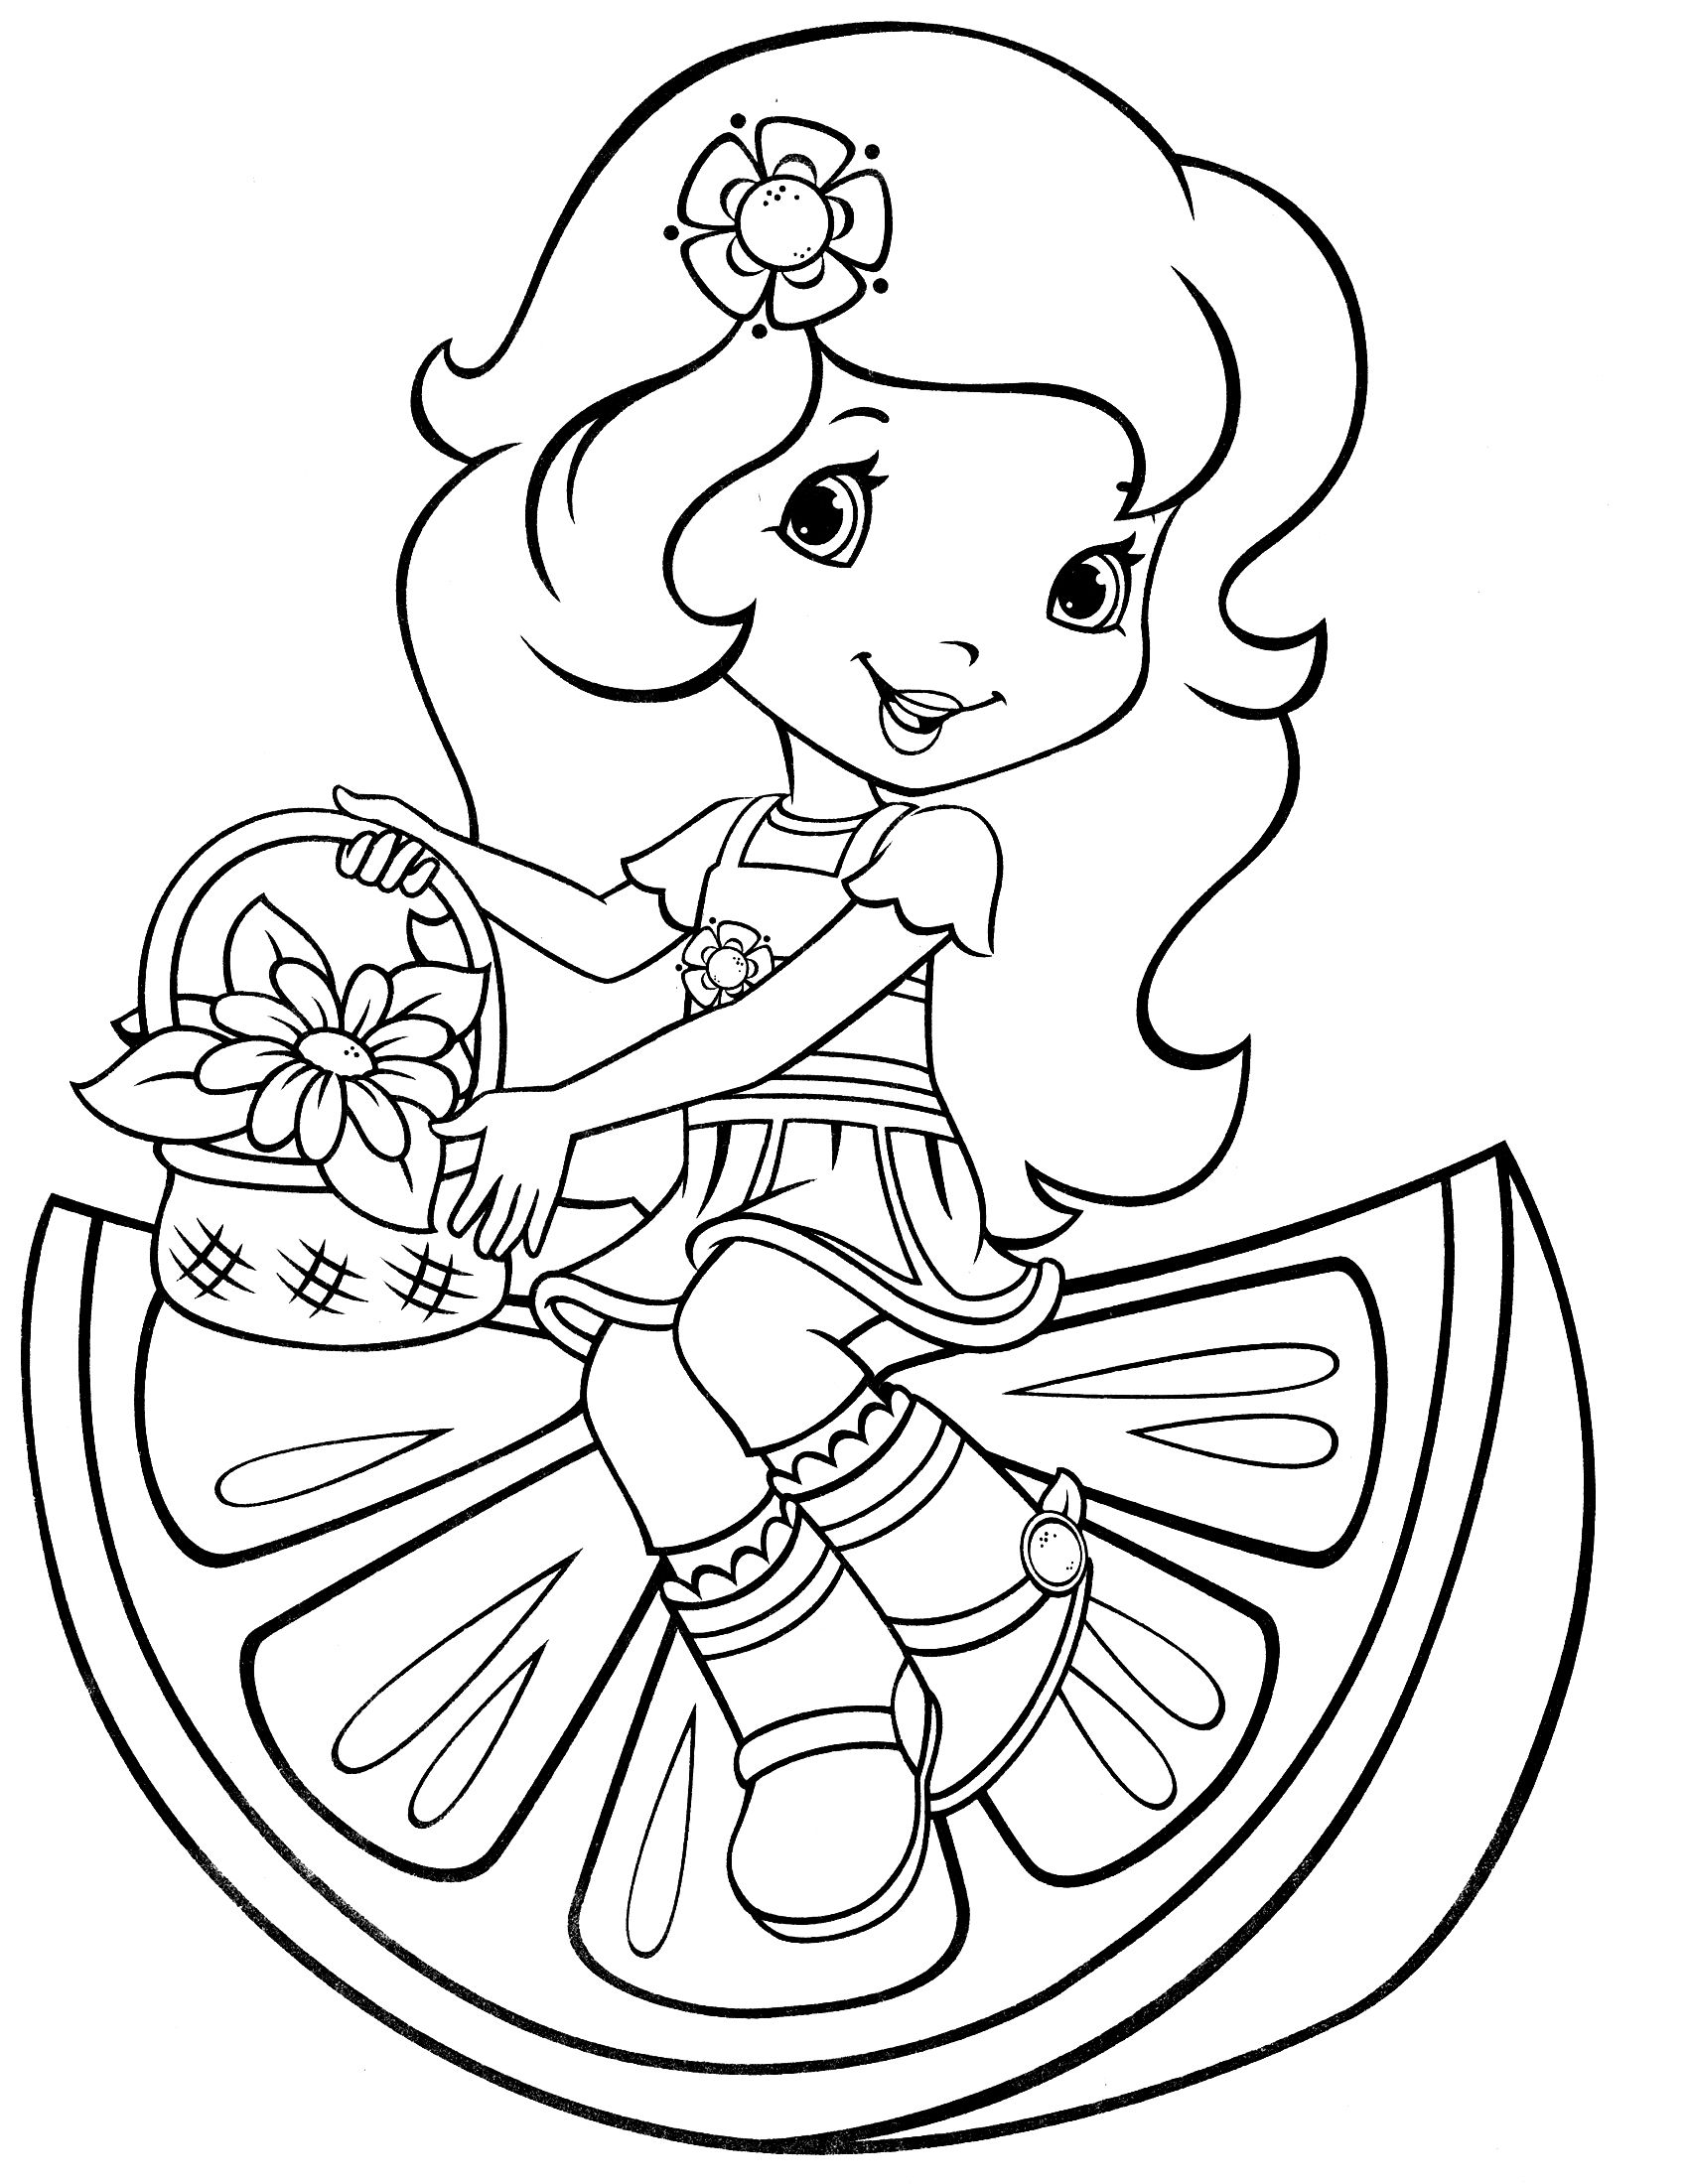 strawberry shortcake colouring pages to print strawberry shortcake 4 coloringcolorcom strawberry colouring print to shortcake pages 